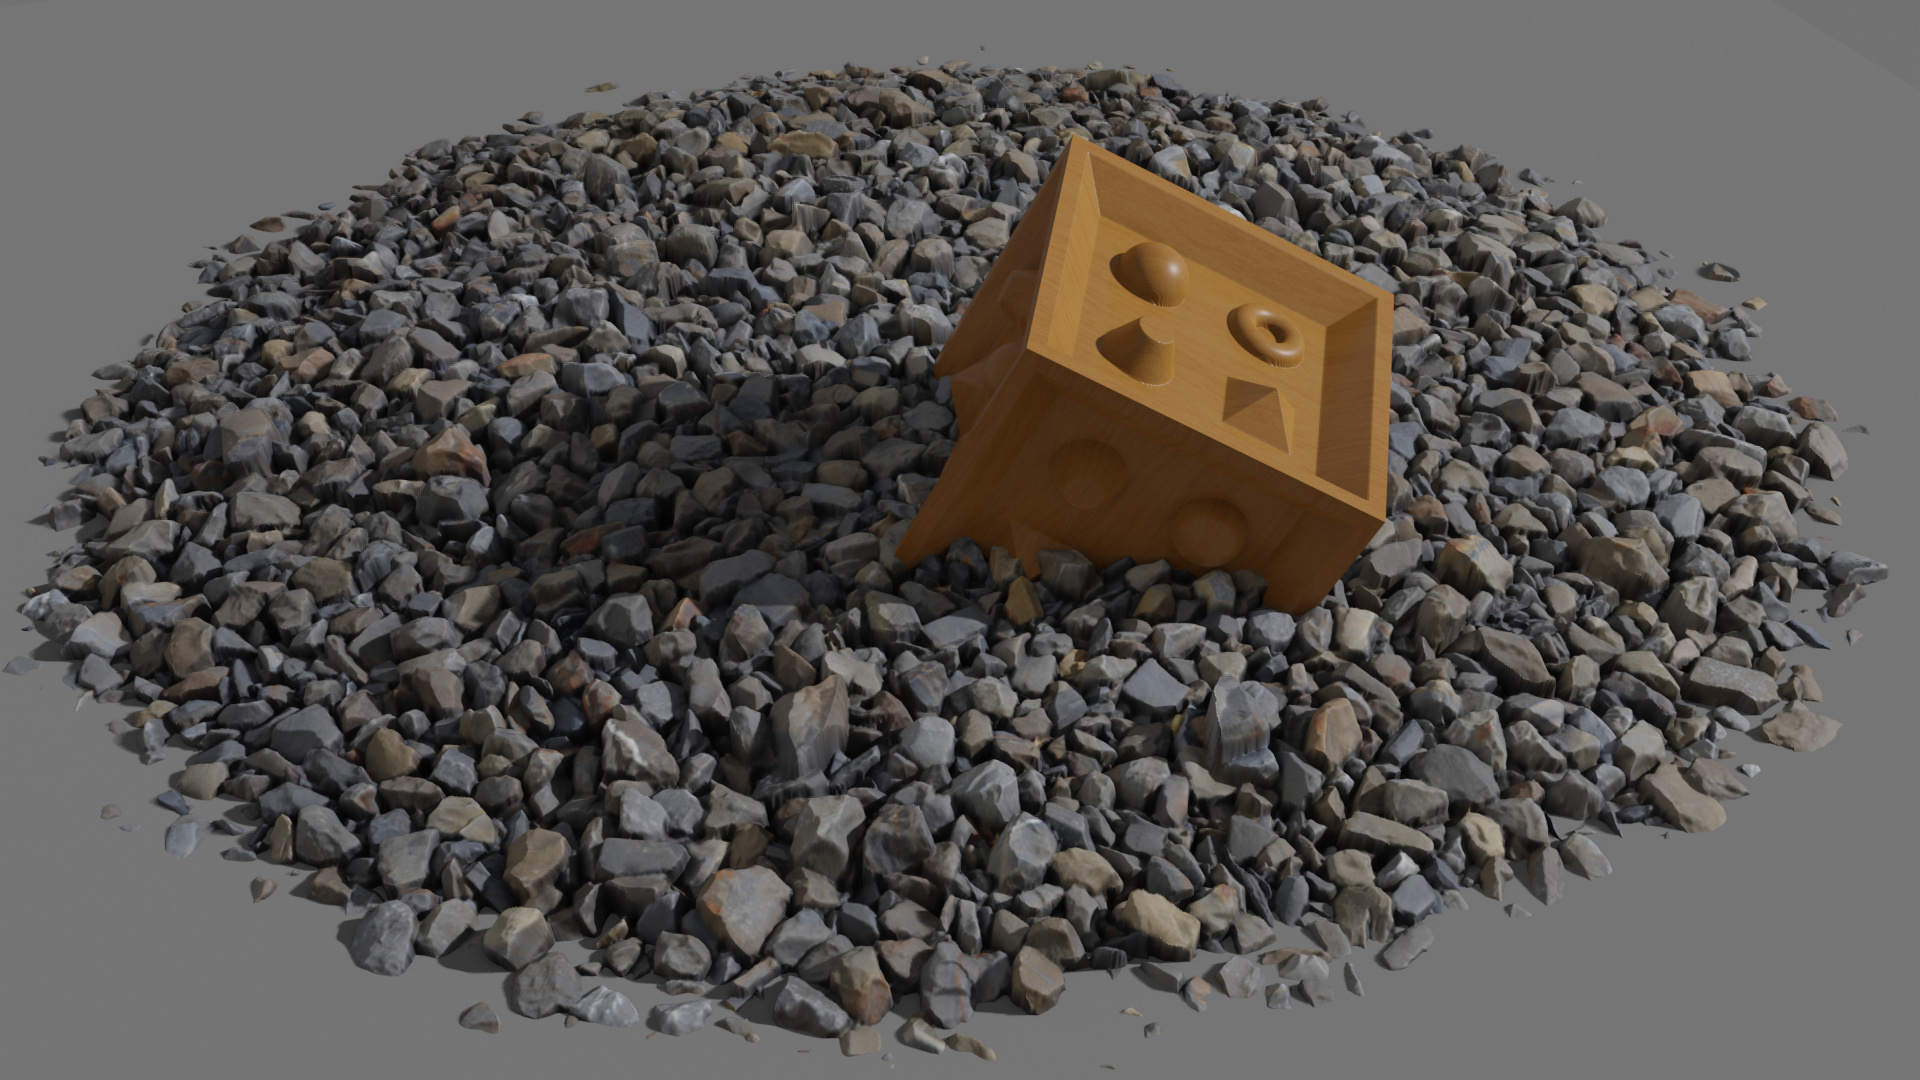 parallax pom bump mapping and pbr